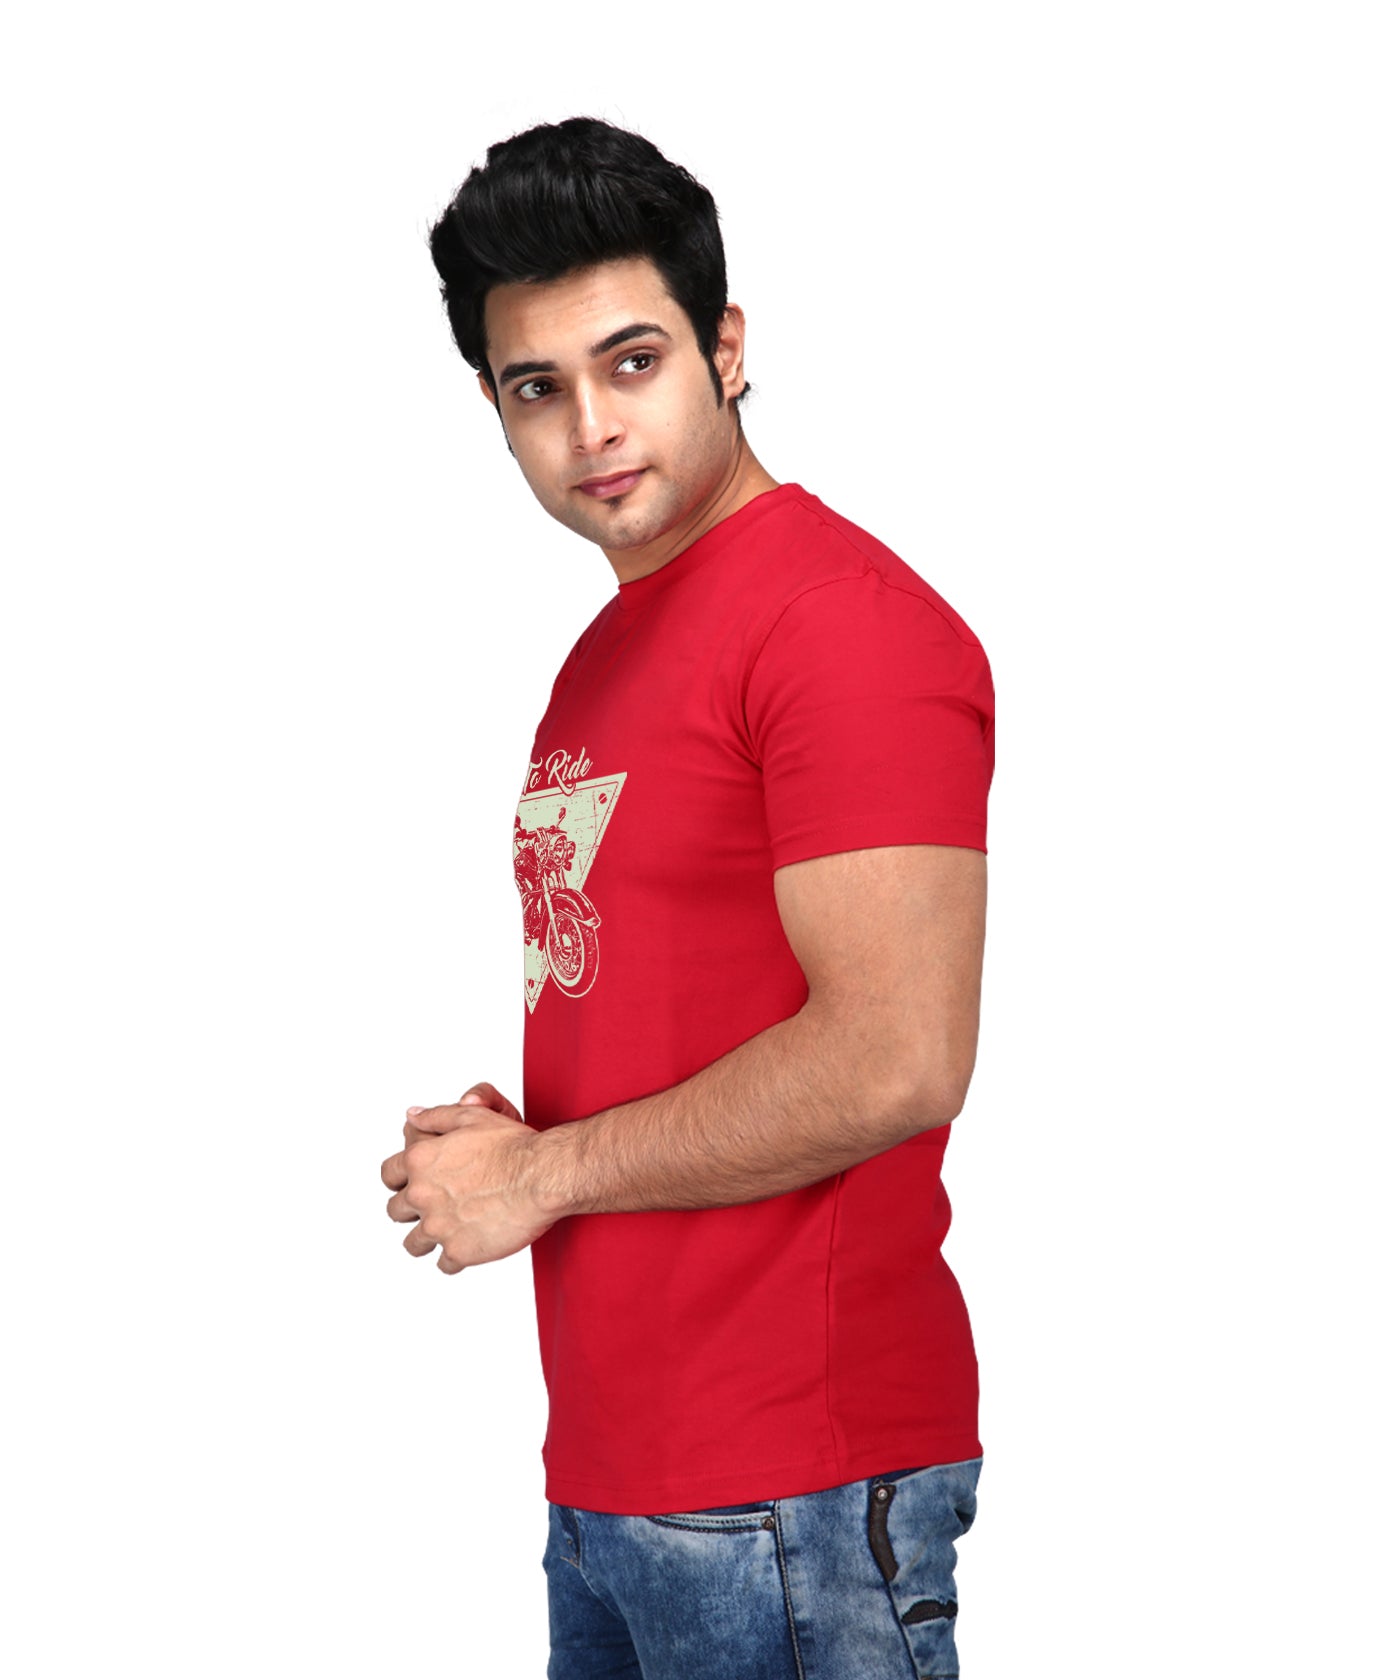 Live to Ride - Premium Round Neck Cotton Tees for Men - Red